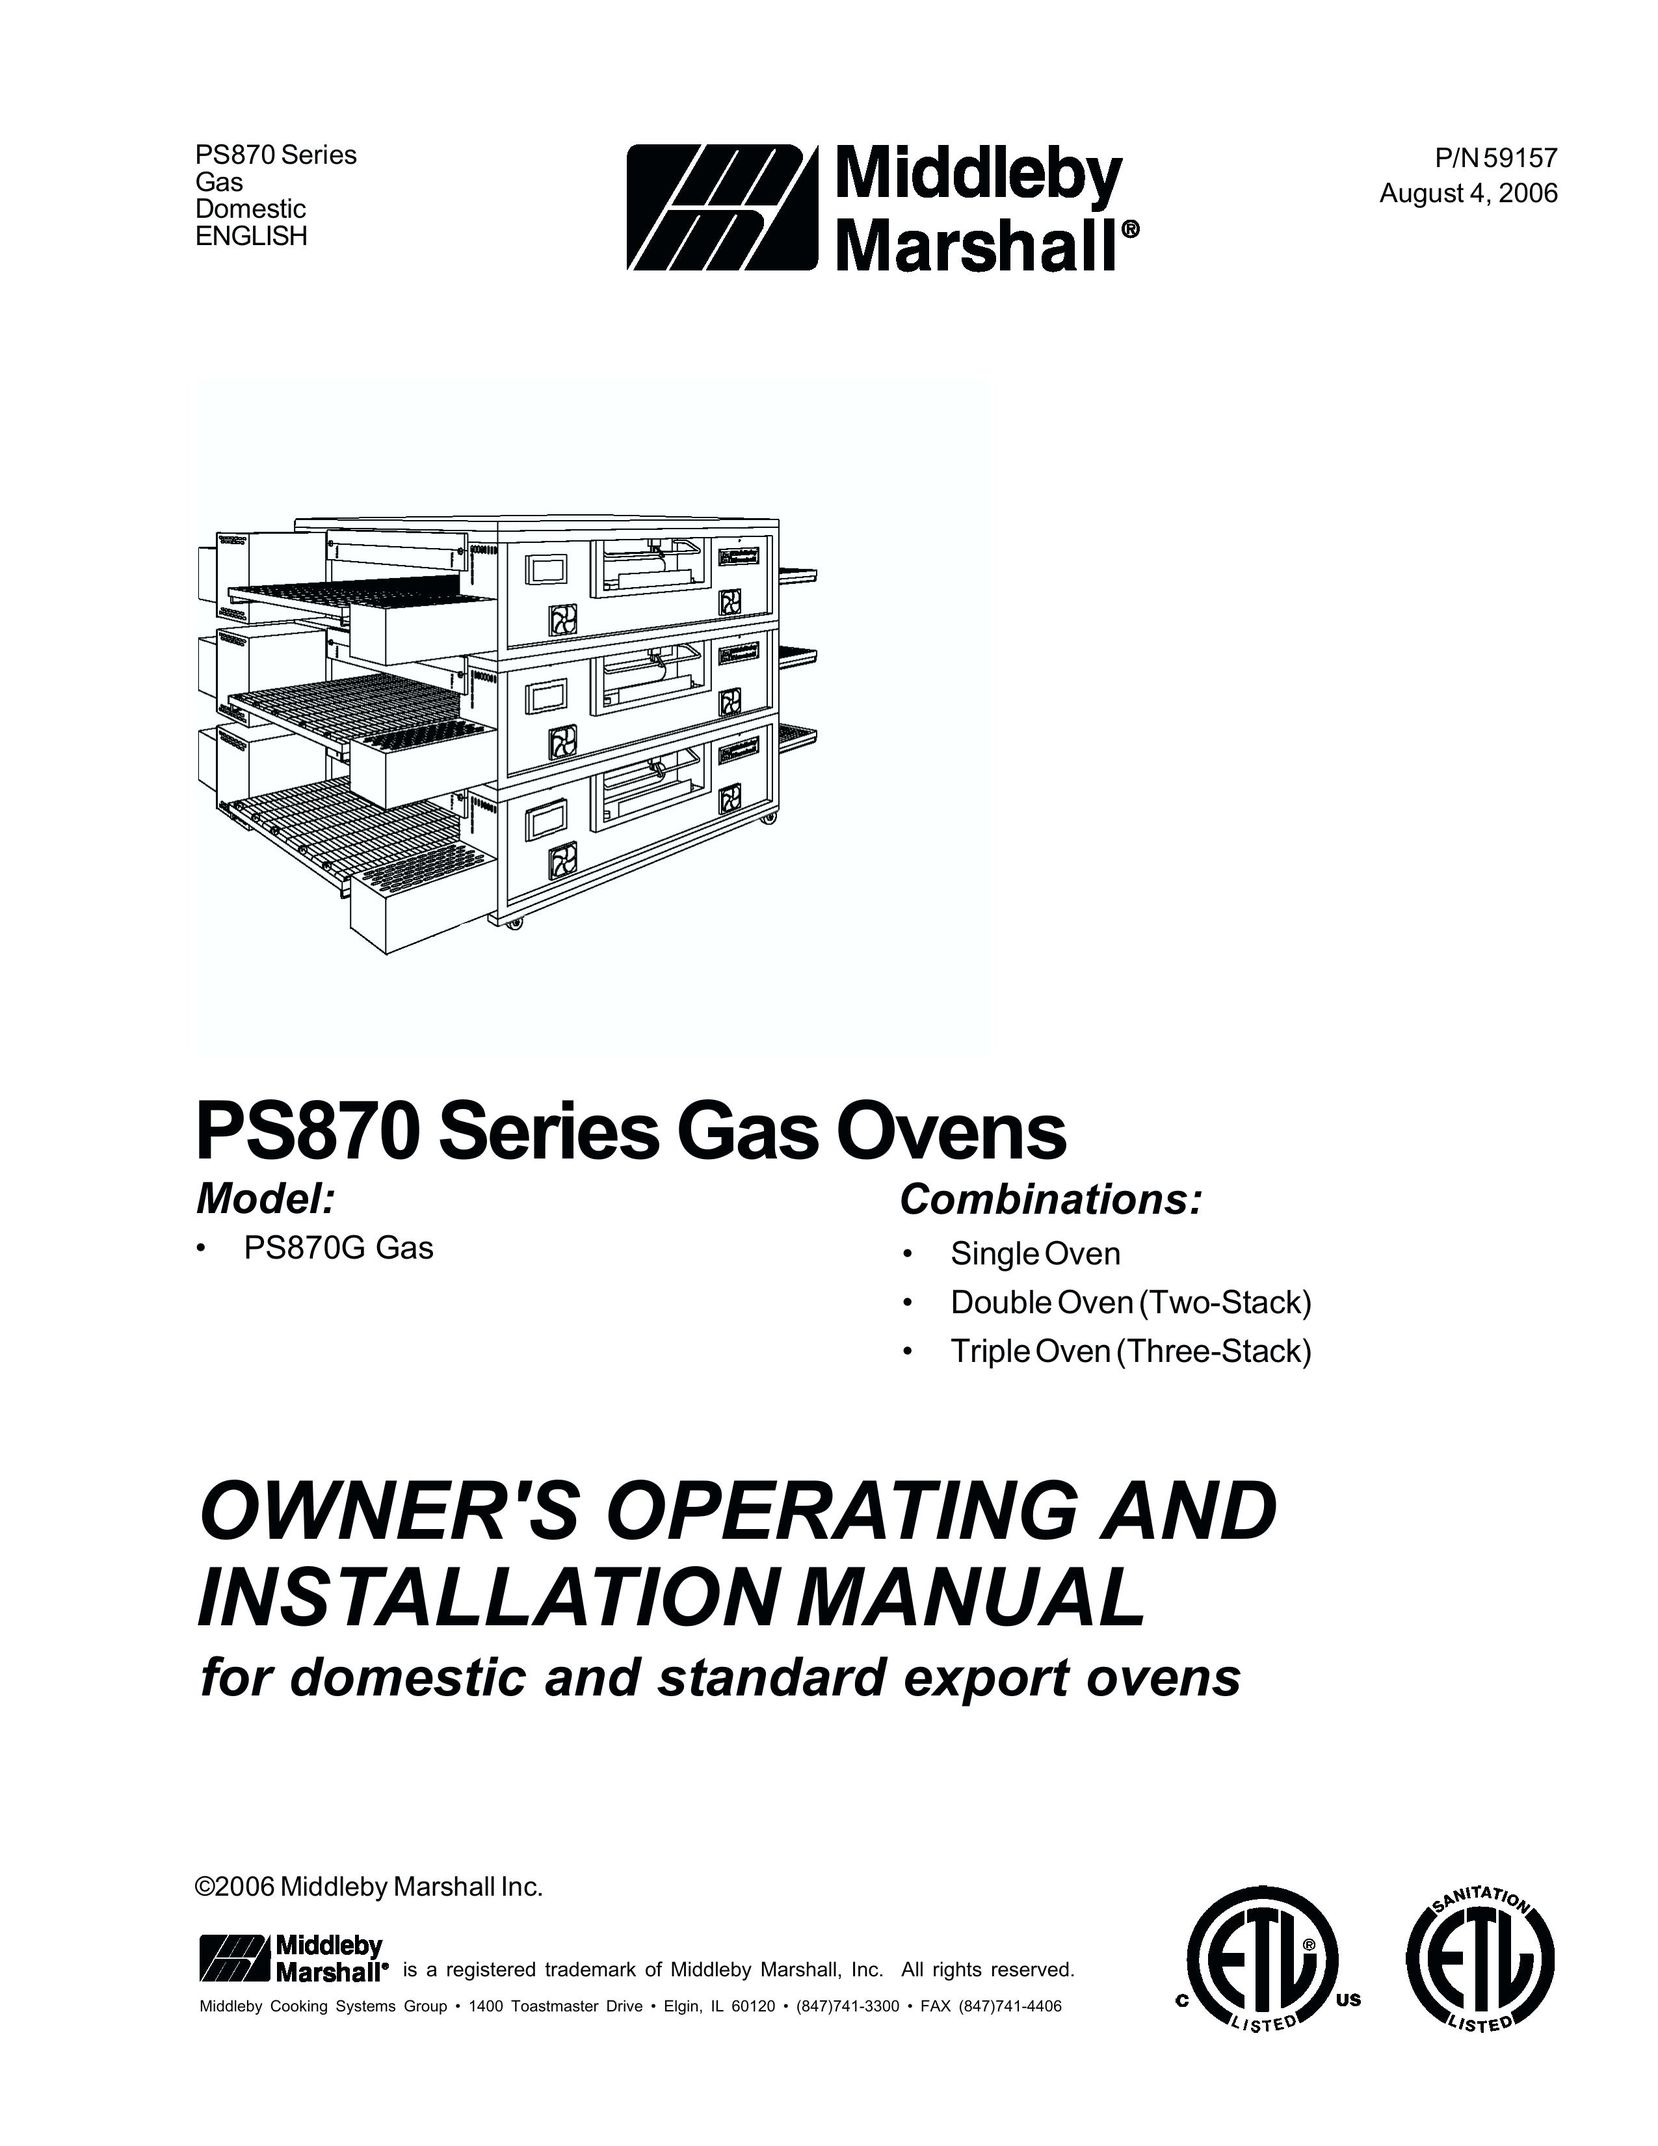 Middleby Cooking Systems Group PS870 Series Oven User Manual